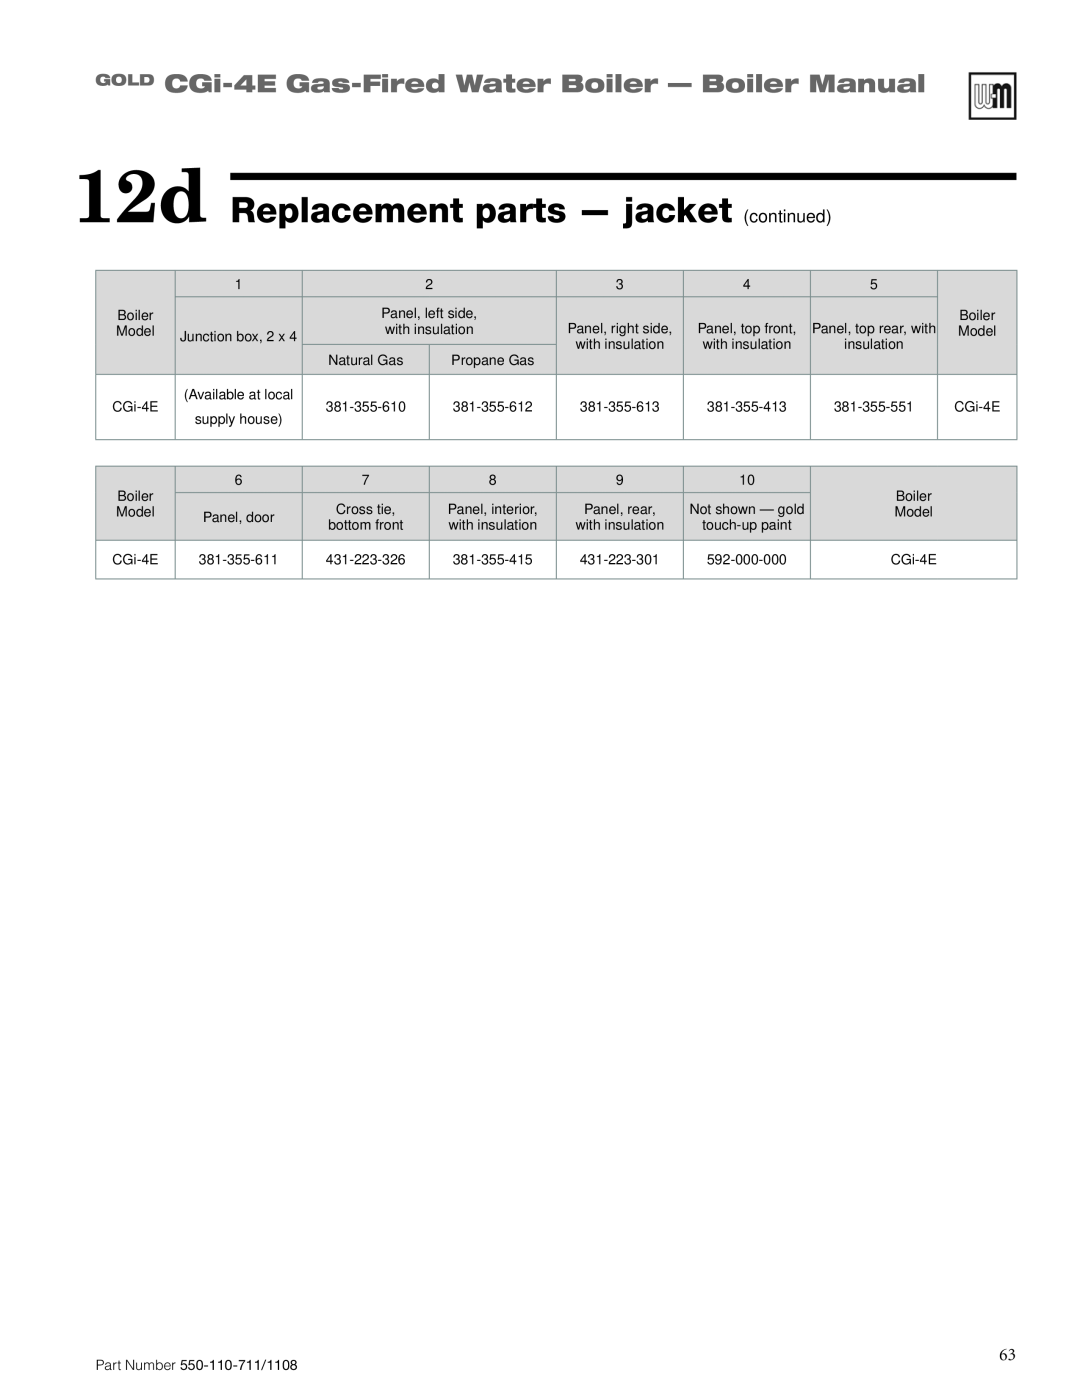 Weil-McLain CGI-4E manual 12d Replacement parts - jacket continued, GOLD CGi-4E Gas-FiredWater Boiler - Boiler Manual 